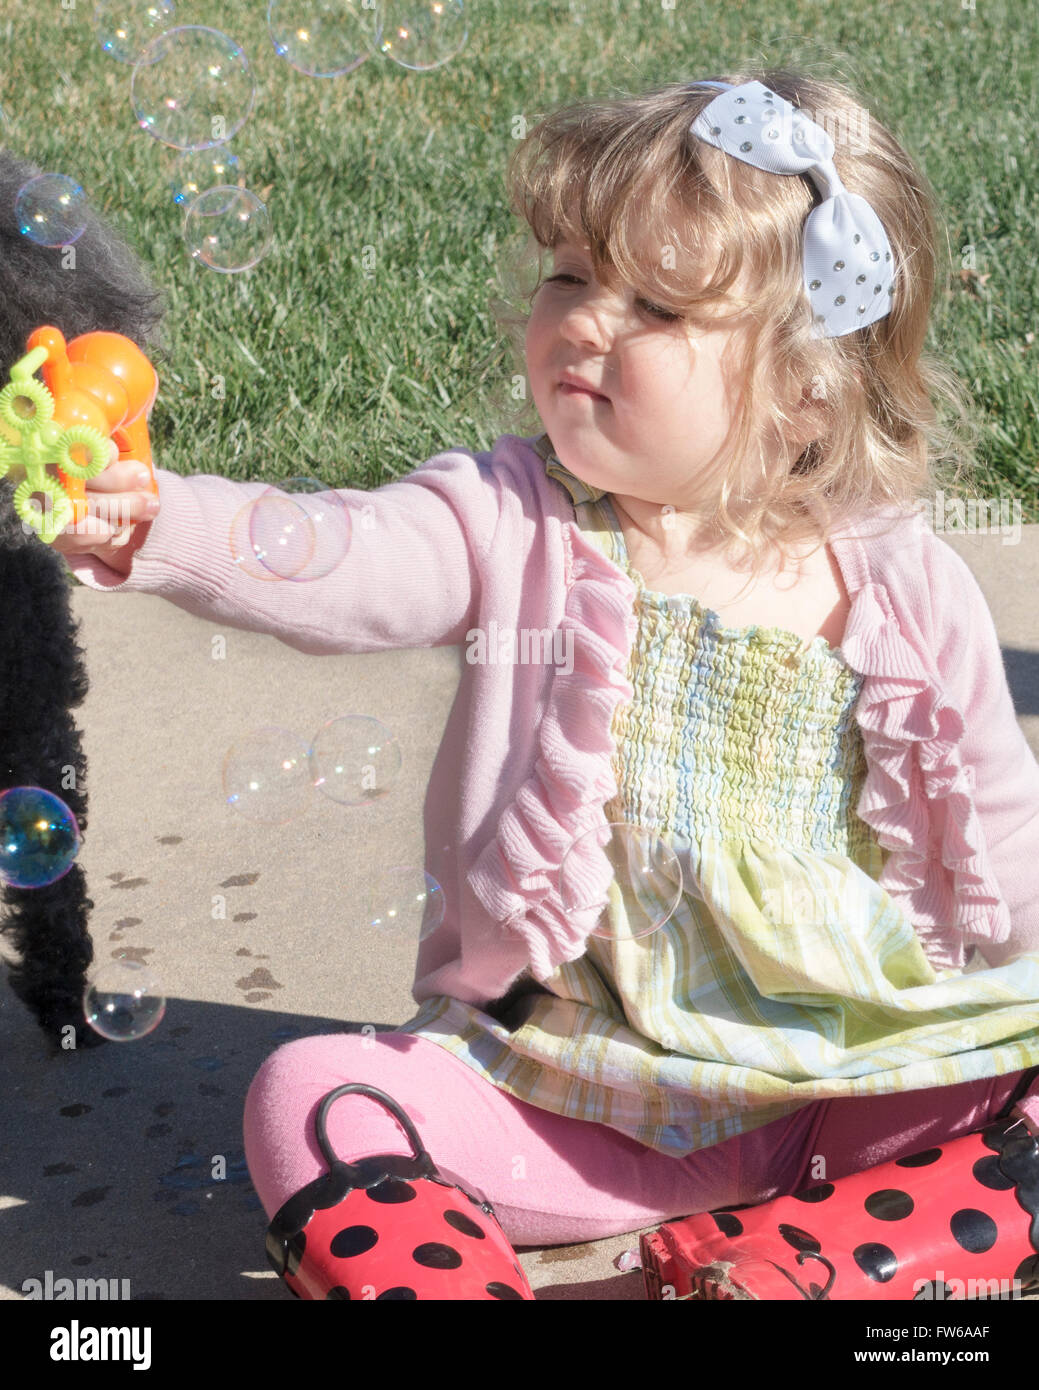 A two year old Caucasian toddler girl makes soap bubbles with a toy bubble maker. Stock Photo